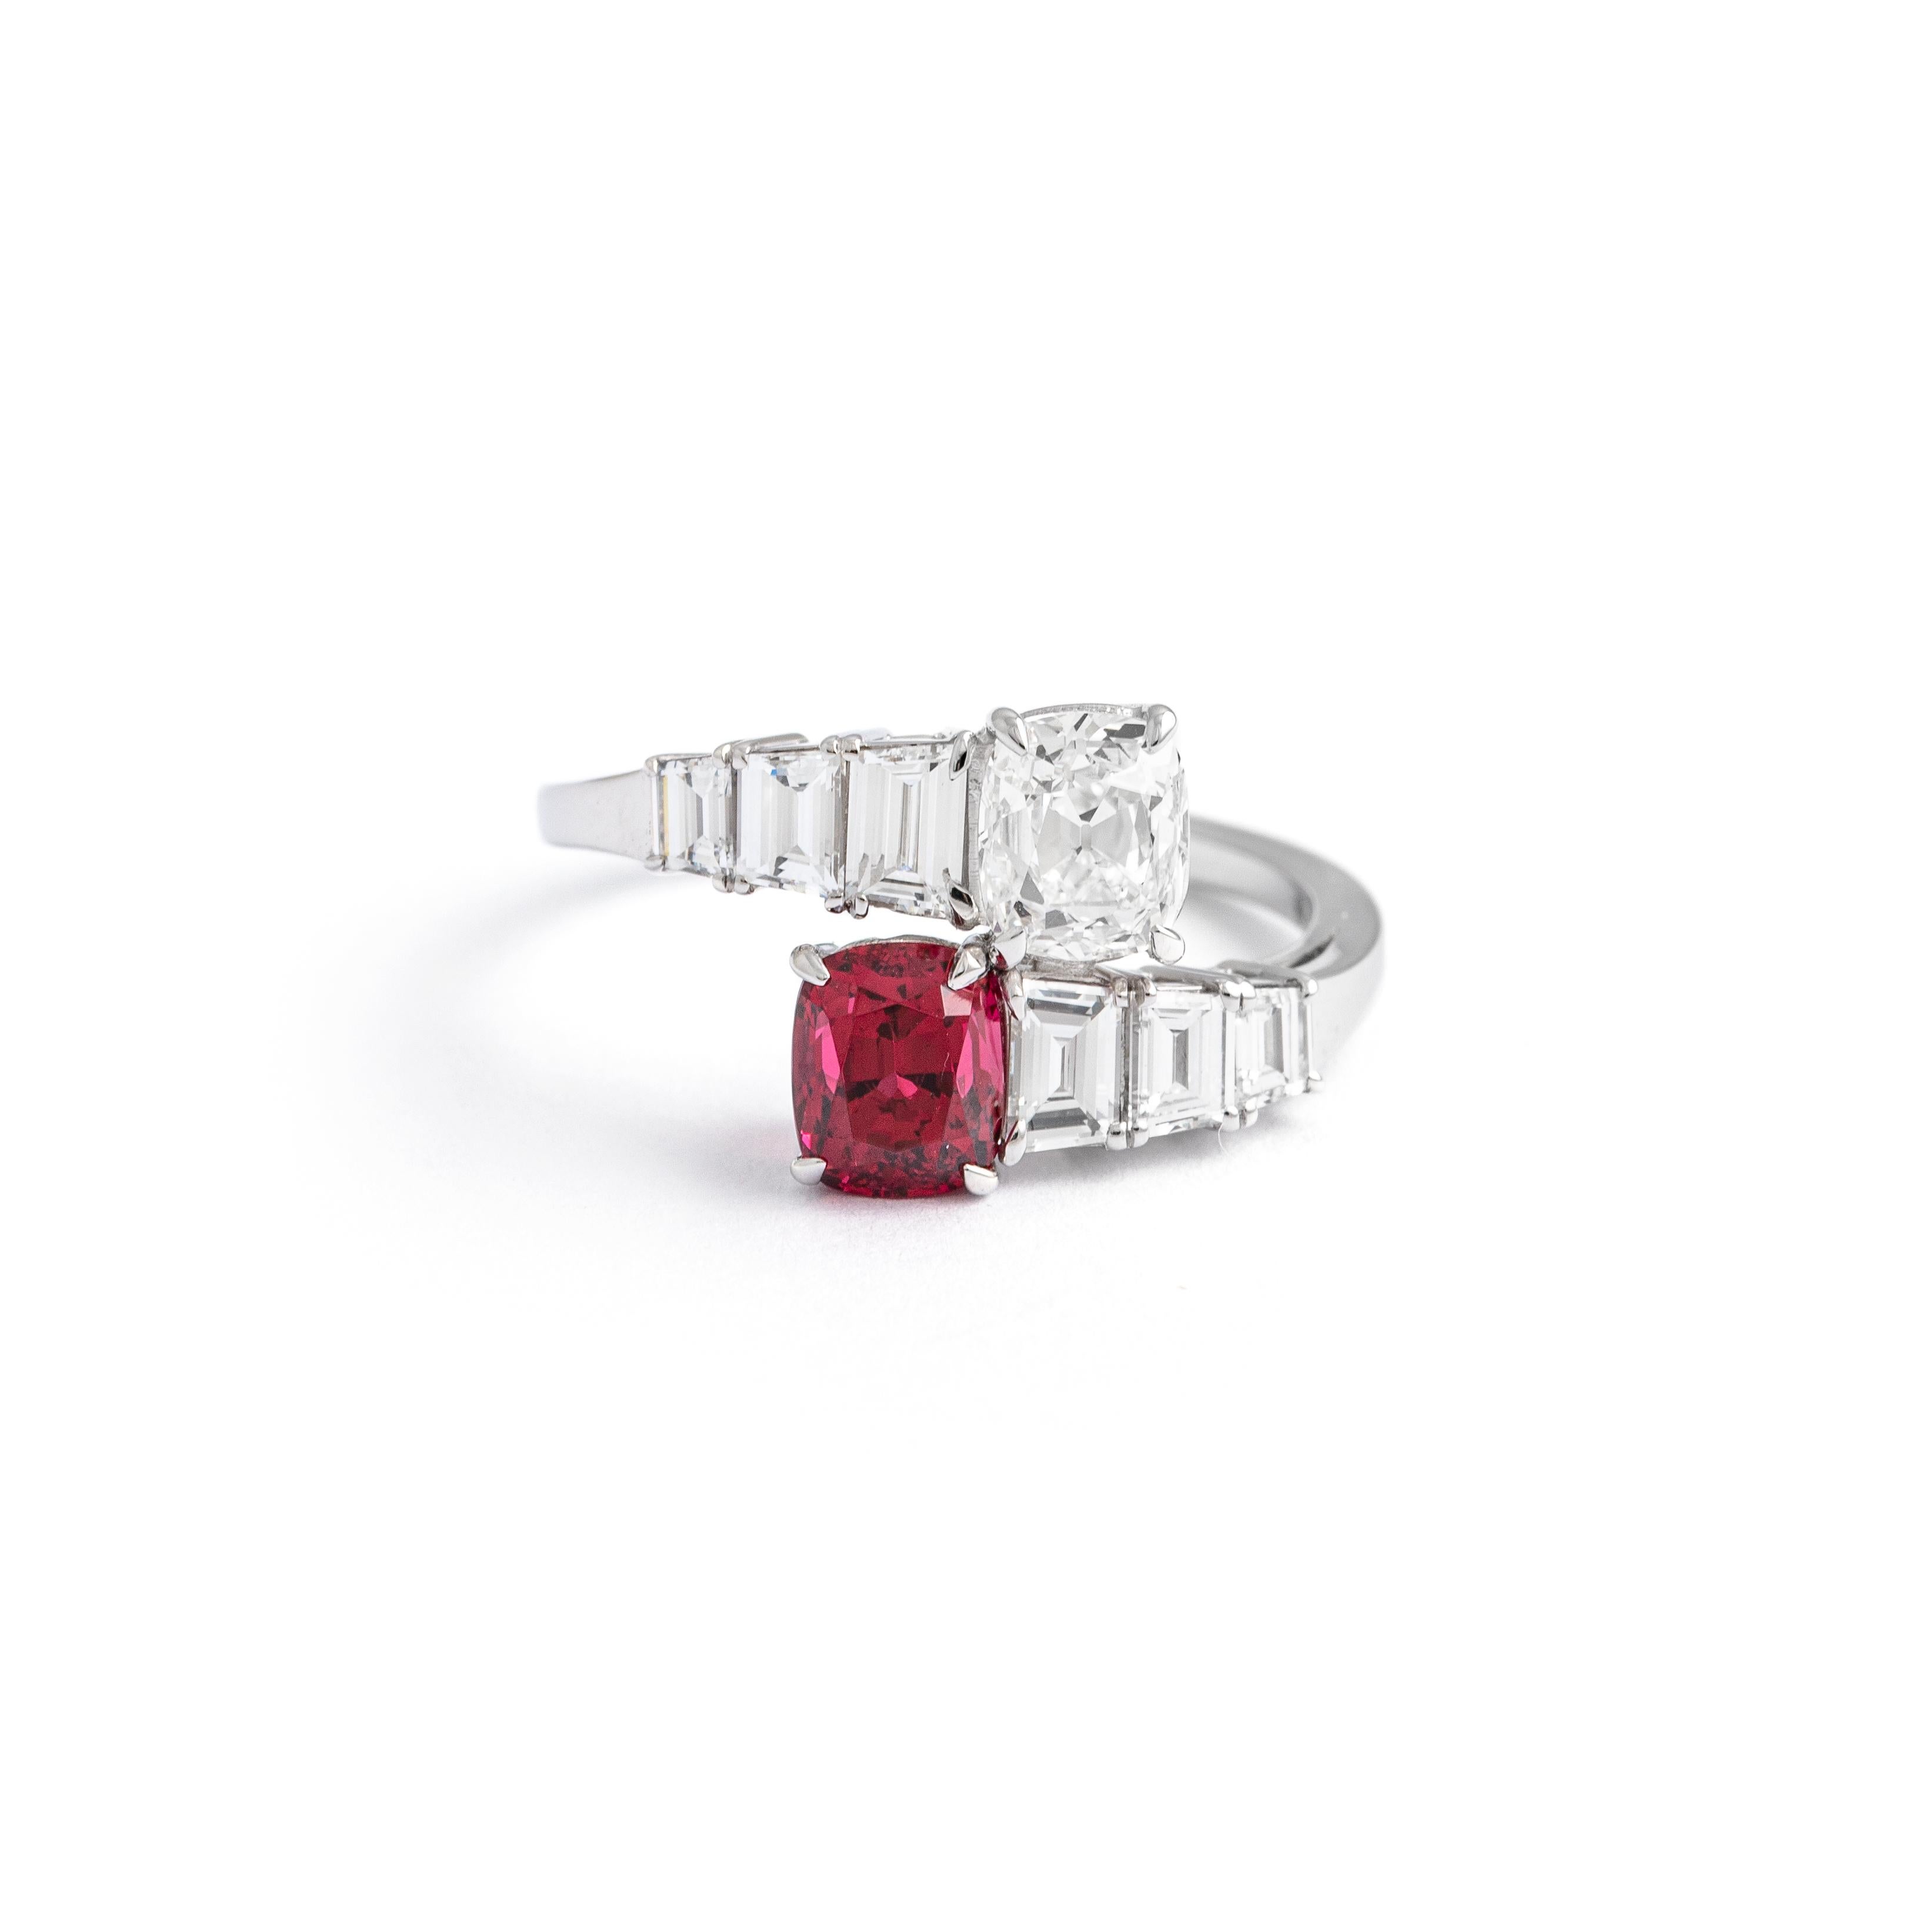 Toi et Moi Ring, 1 carat diamond cushion shape H/SI1 (GIA) with 1.21 vibrant red spinel of same shape from Mogok, on the sides 6 diamonds baguette cut E/VS, 0.88 carat mounted on white gold. 
Certified by a Swiss Laboratory.


Weight: 4.63